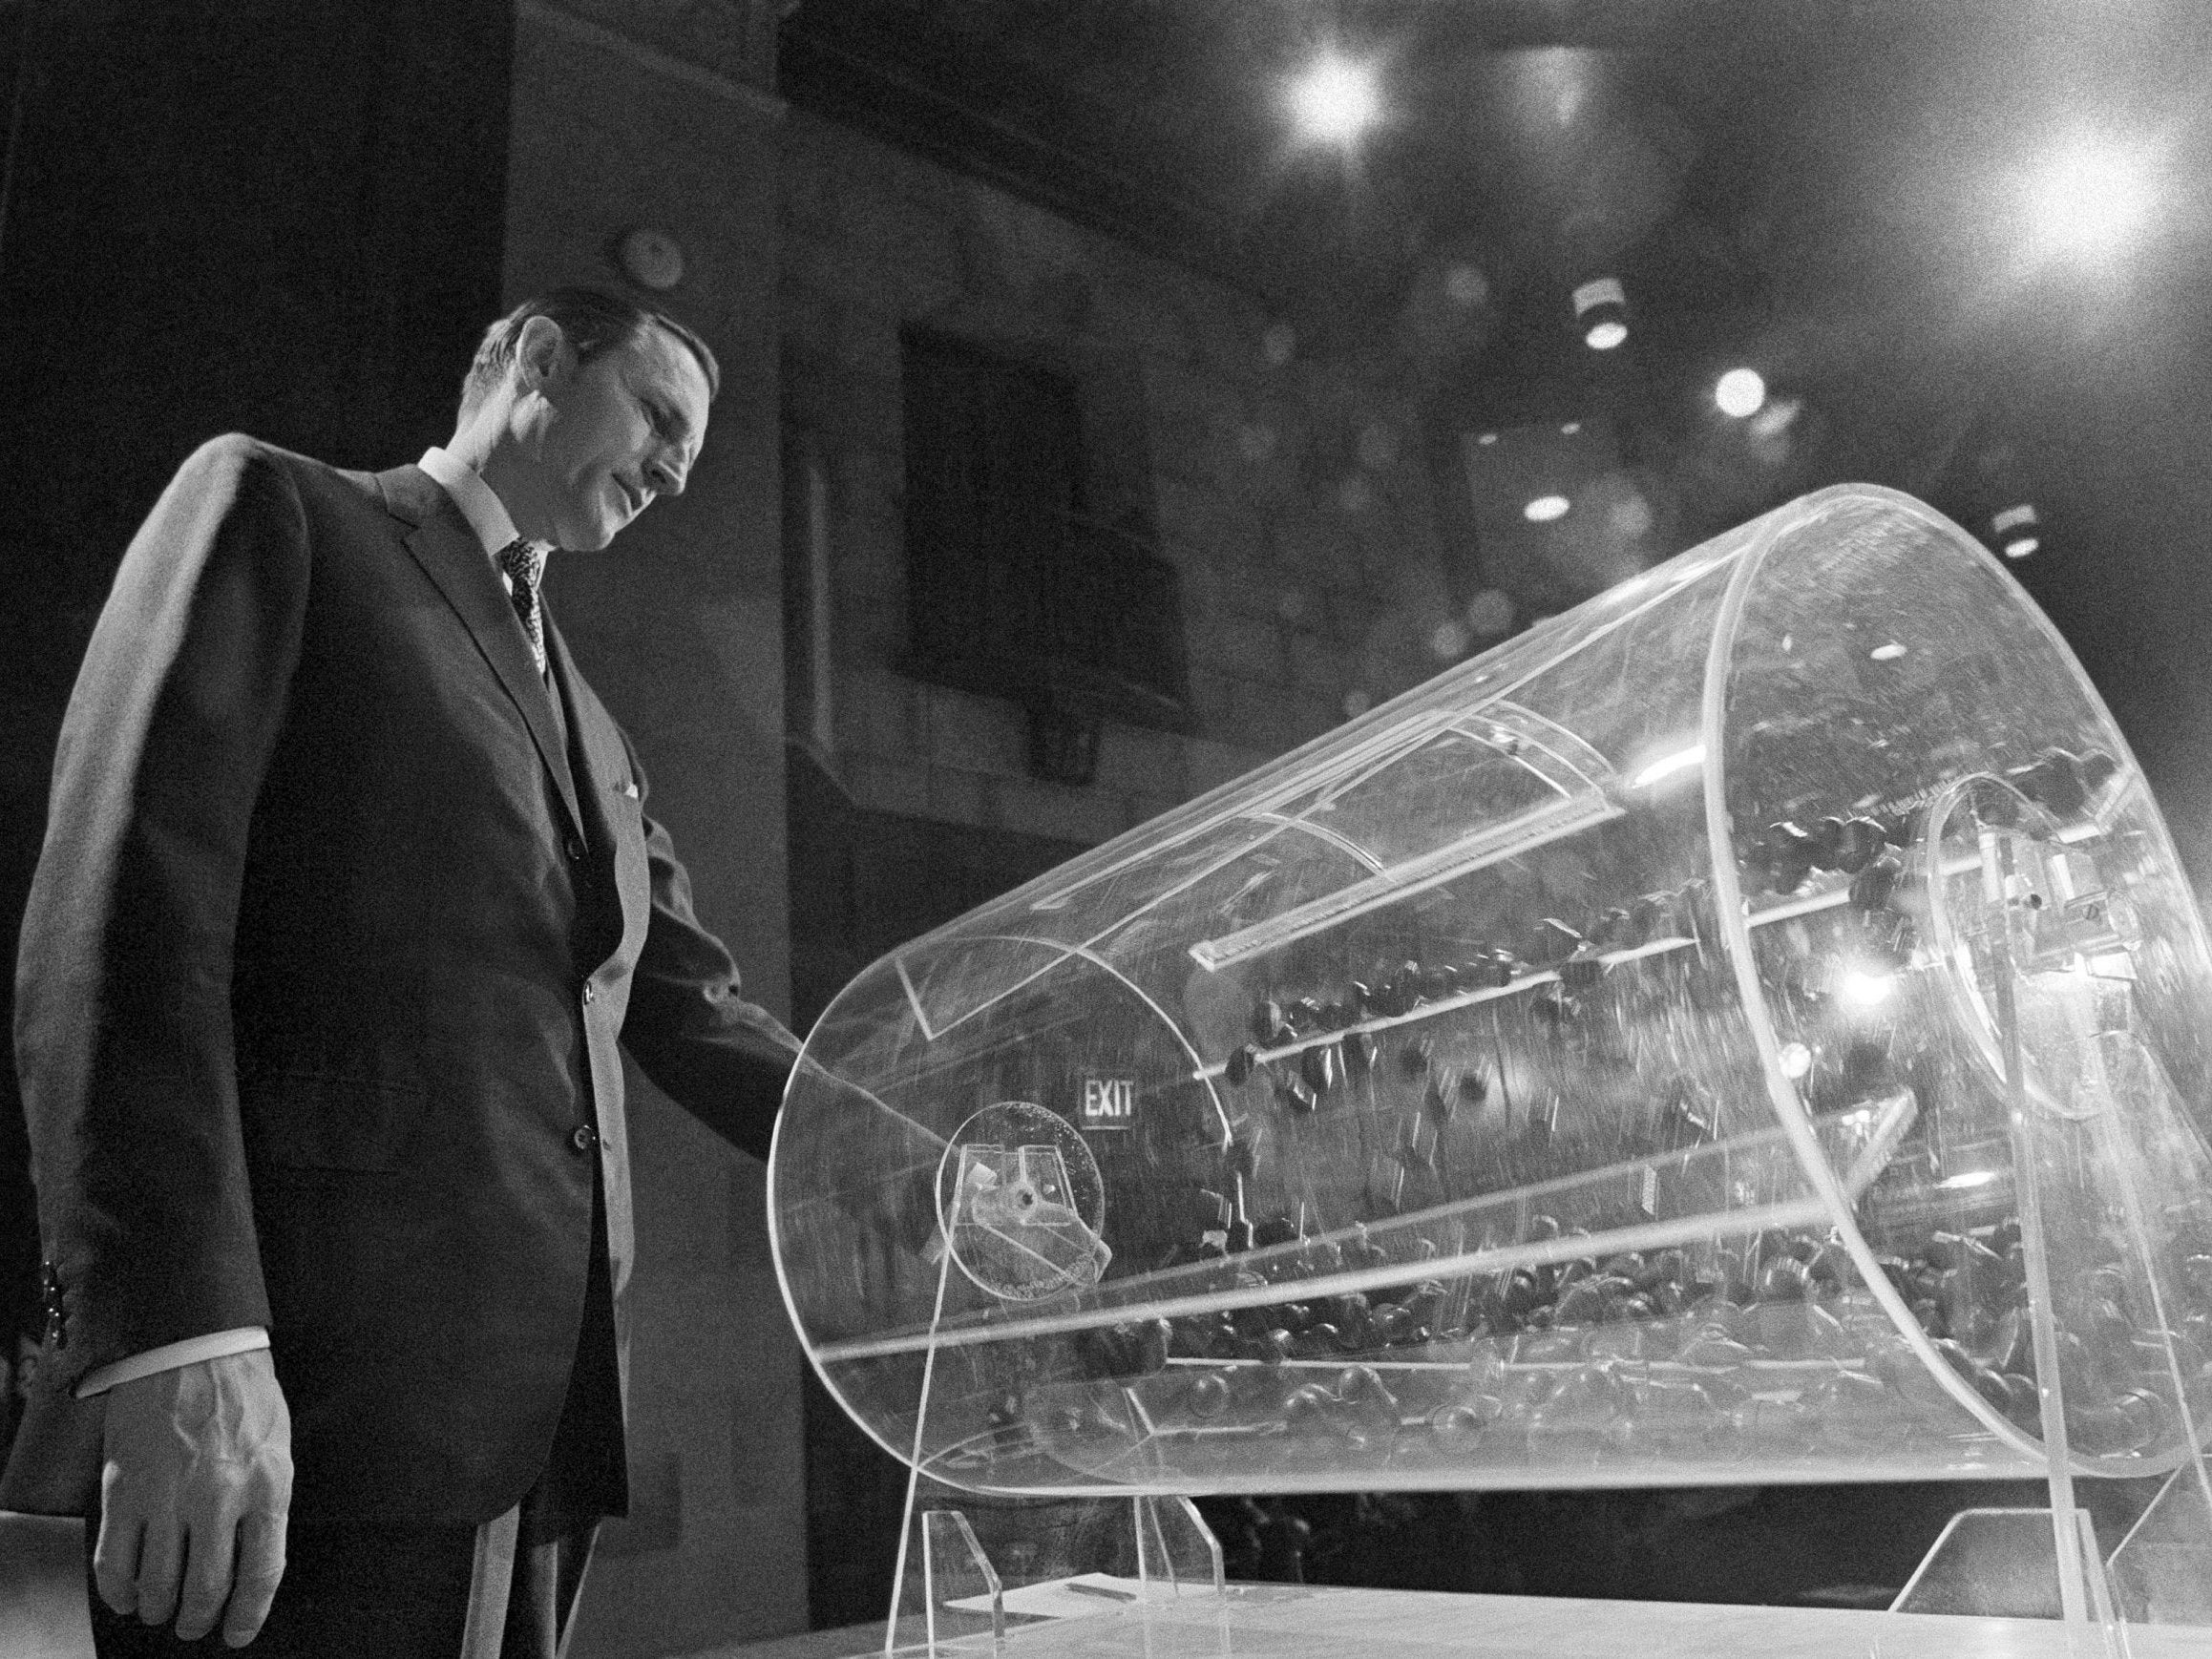 Pictured: Draft Director Curtis W. Tarr spins a Plexiglas drum in Washington as the 4th annual .lottery draw begins on 2 February 1972.